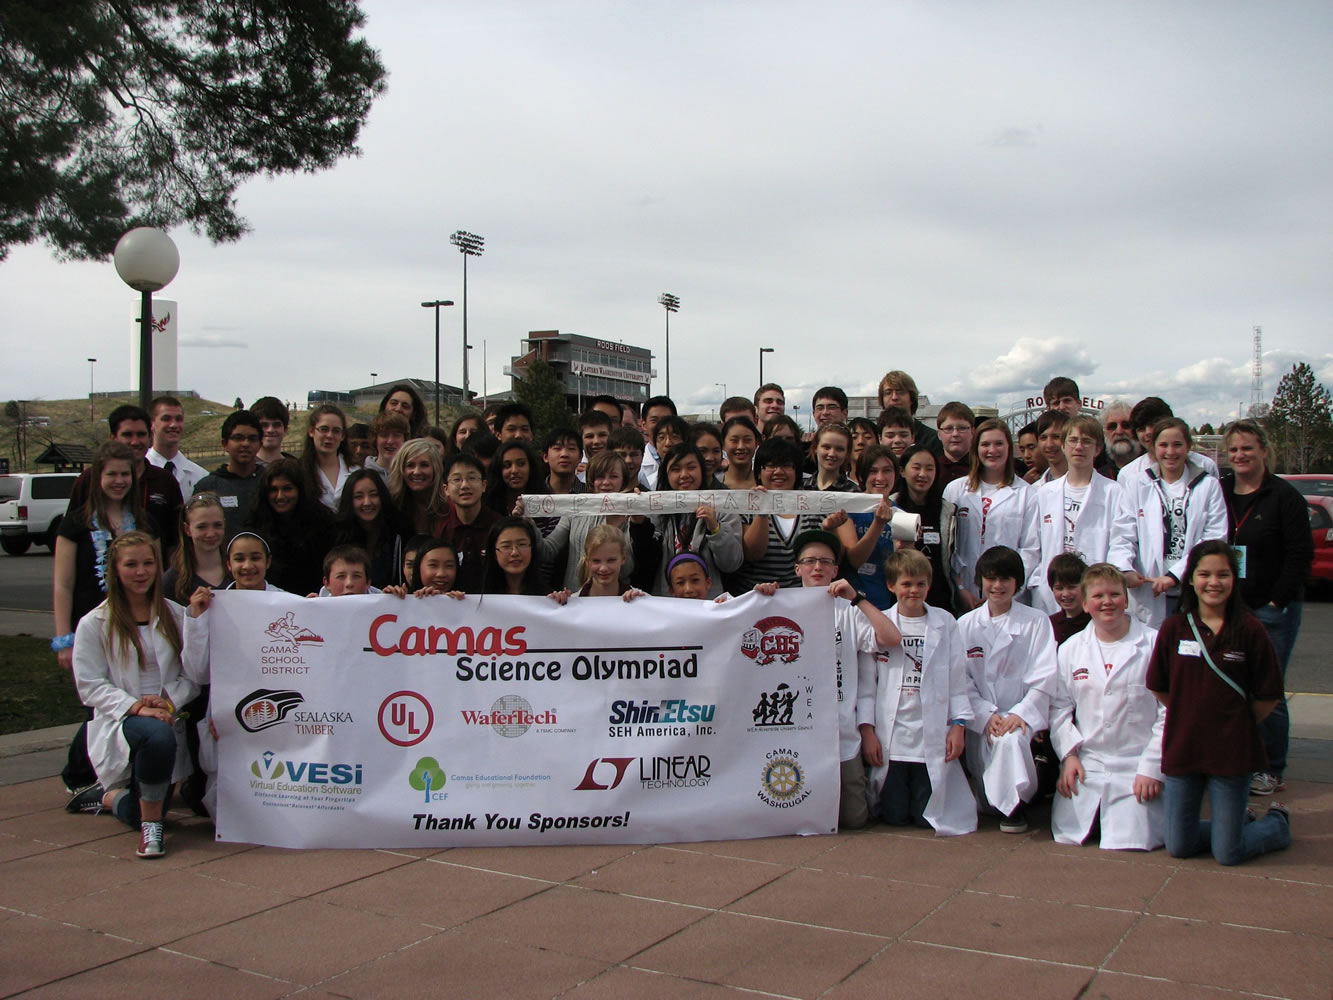 The Camas High School Science Olympiad Team celebrates after winning its third consecutive state championship. The event also included teams from Liberty and Skyridge middle schools, pictured here.